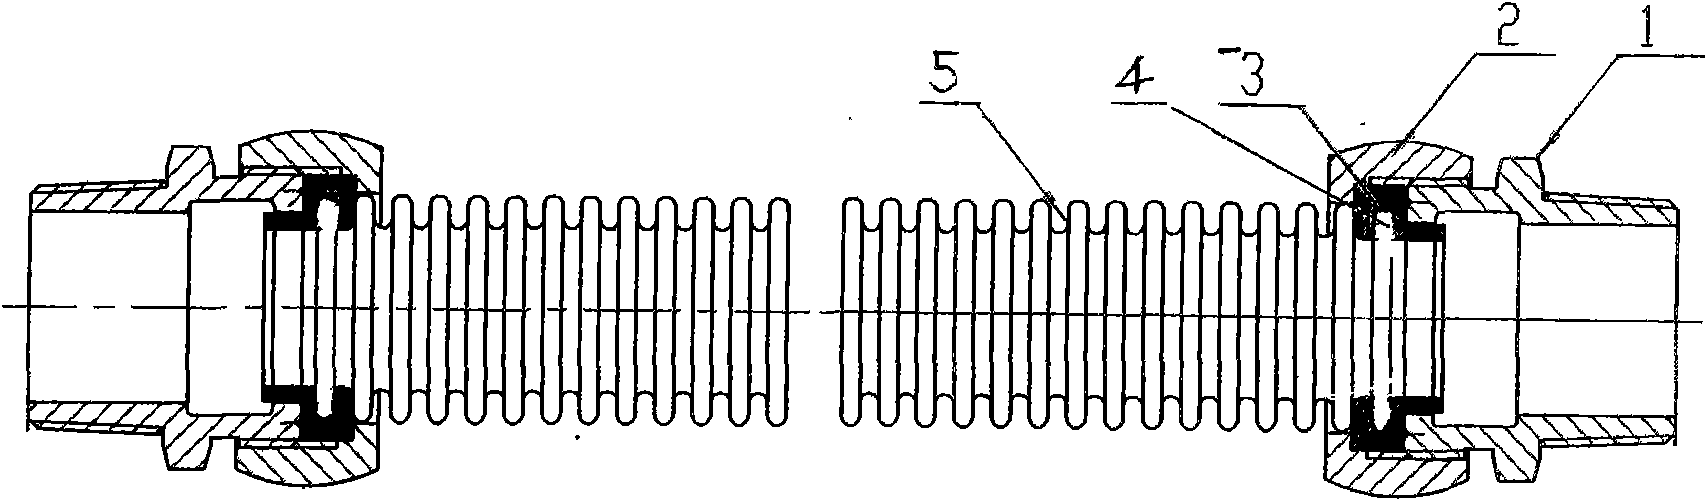 Connecting tube of end of water system of central air conditioner and manufacture process thereof